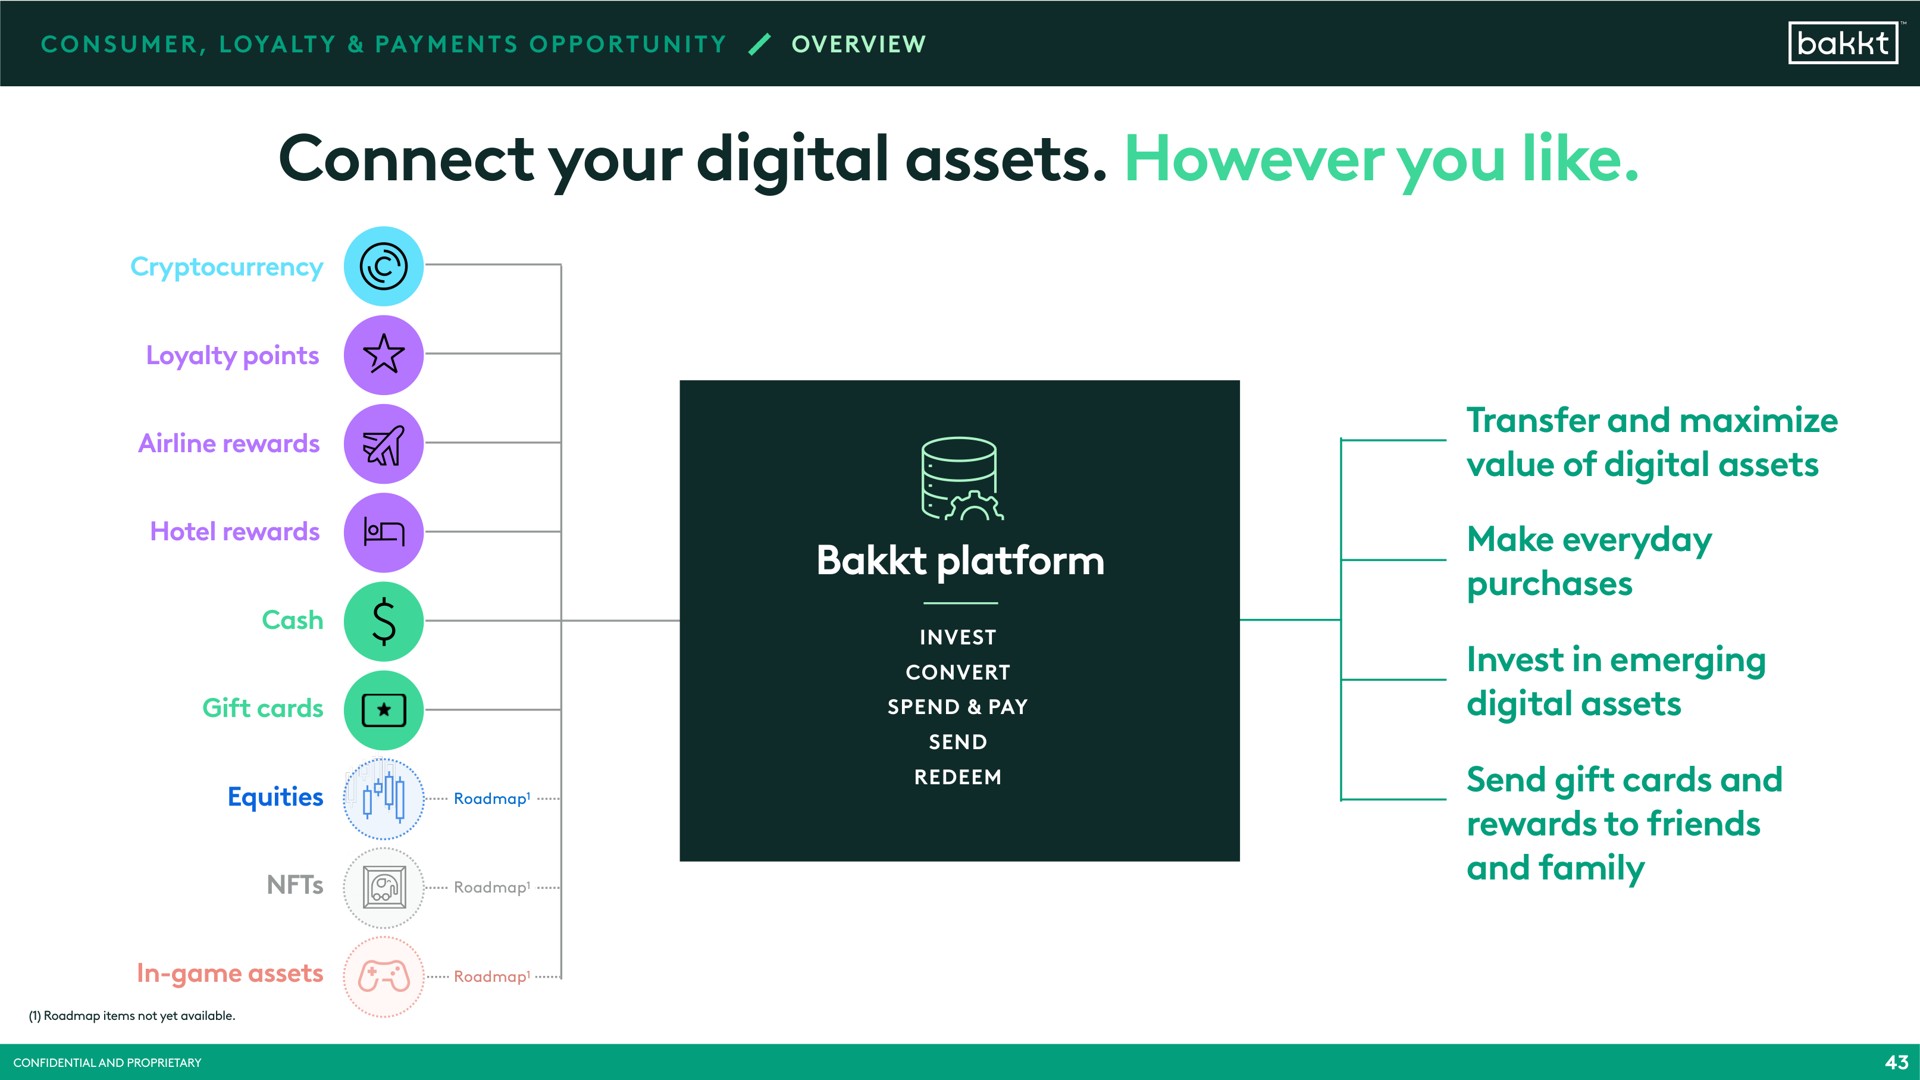 connect your digital assets however you like platform transfer and maximize value of digital assets make everyday purchases invest in emerging digital assets send gift cards and rewards to friends and family | Bakkt